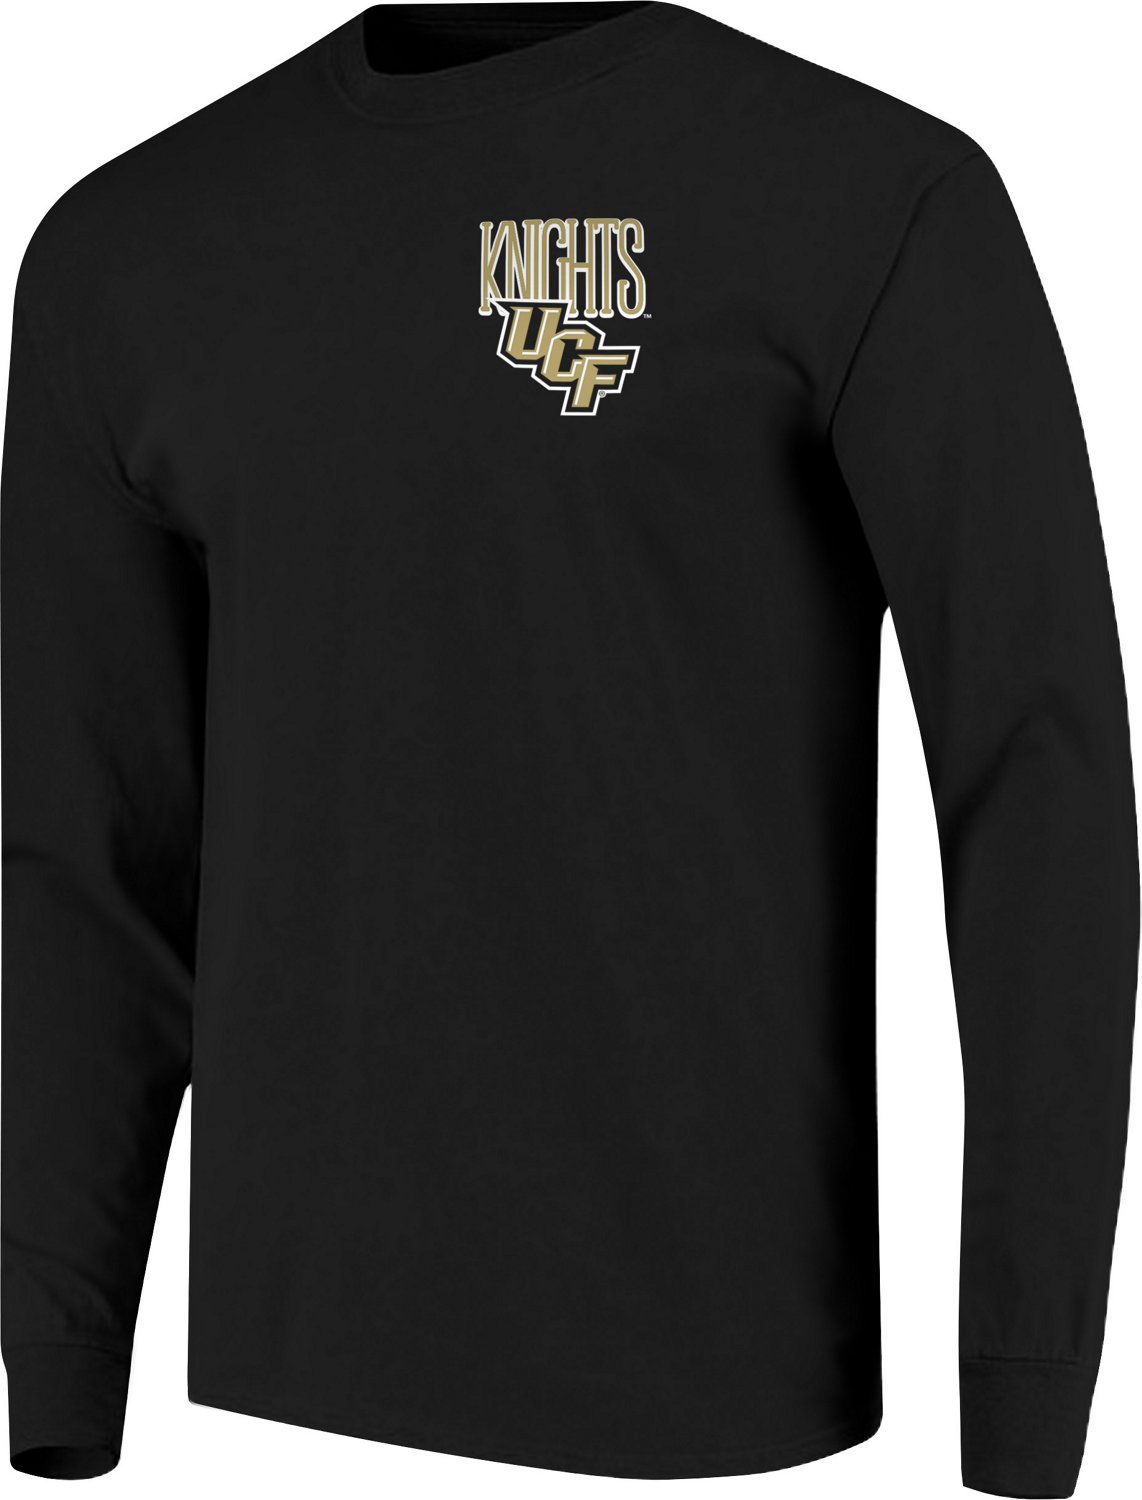 Brushed ProSphere University of Central Florida Mens Performance T-Shirt 796652FC Black and Gold 